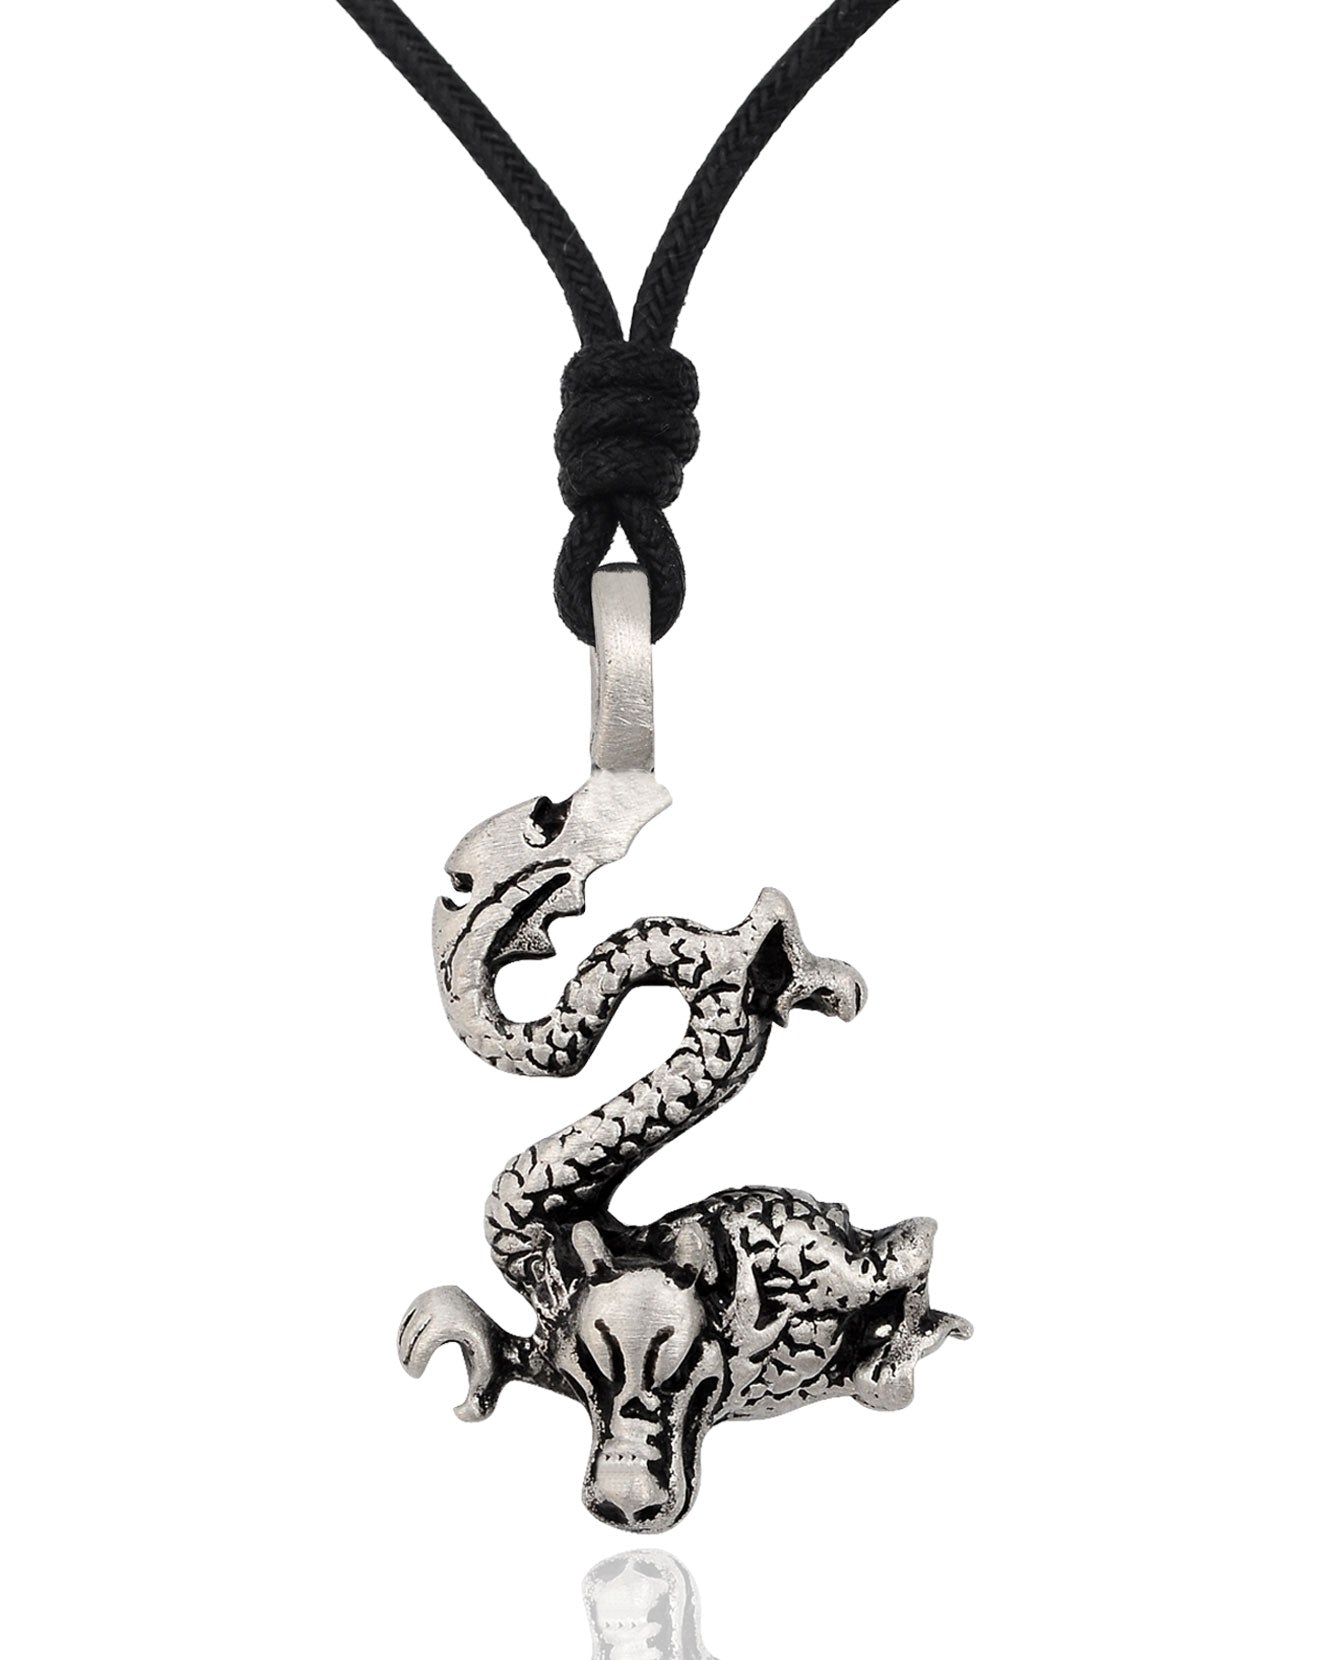 Mystery Dragon Silver Pewter Charm Necklace Pendant Jewelry